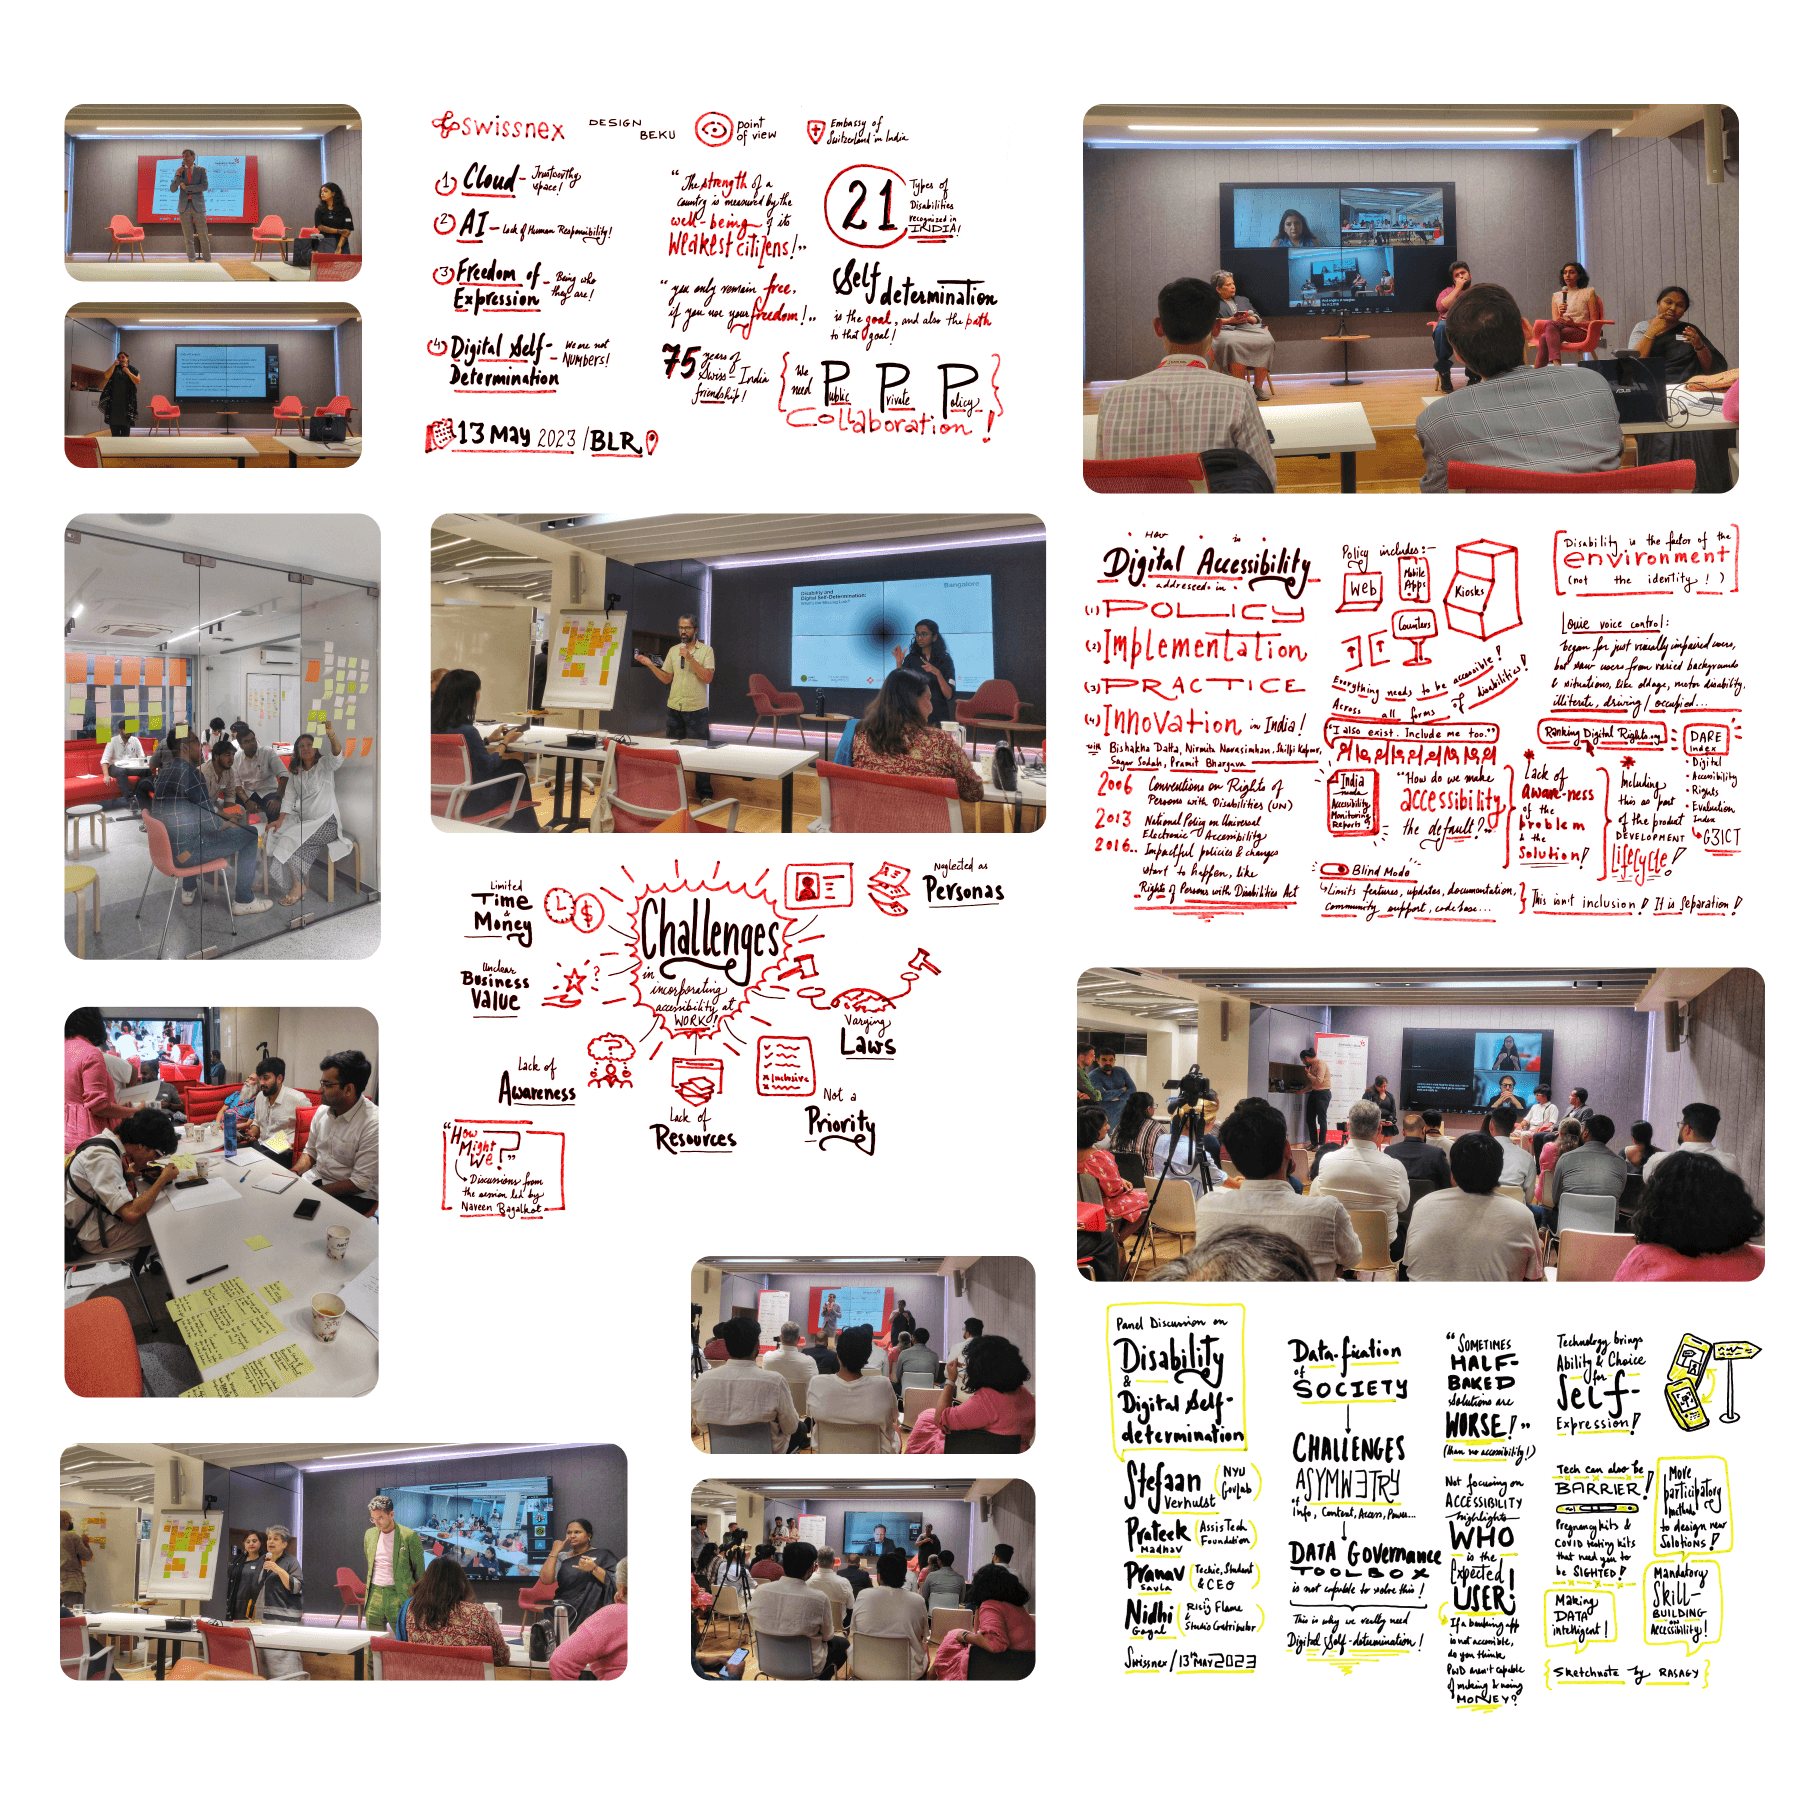 Collage of photos of panels, talks & discussions with 4 sketchnotes by Rasagy from the day-long session.